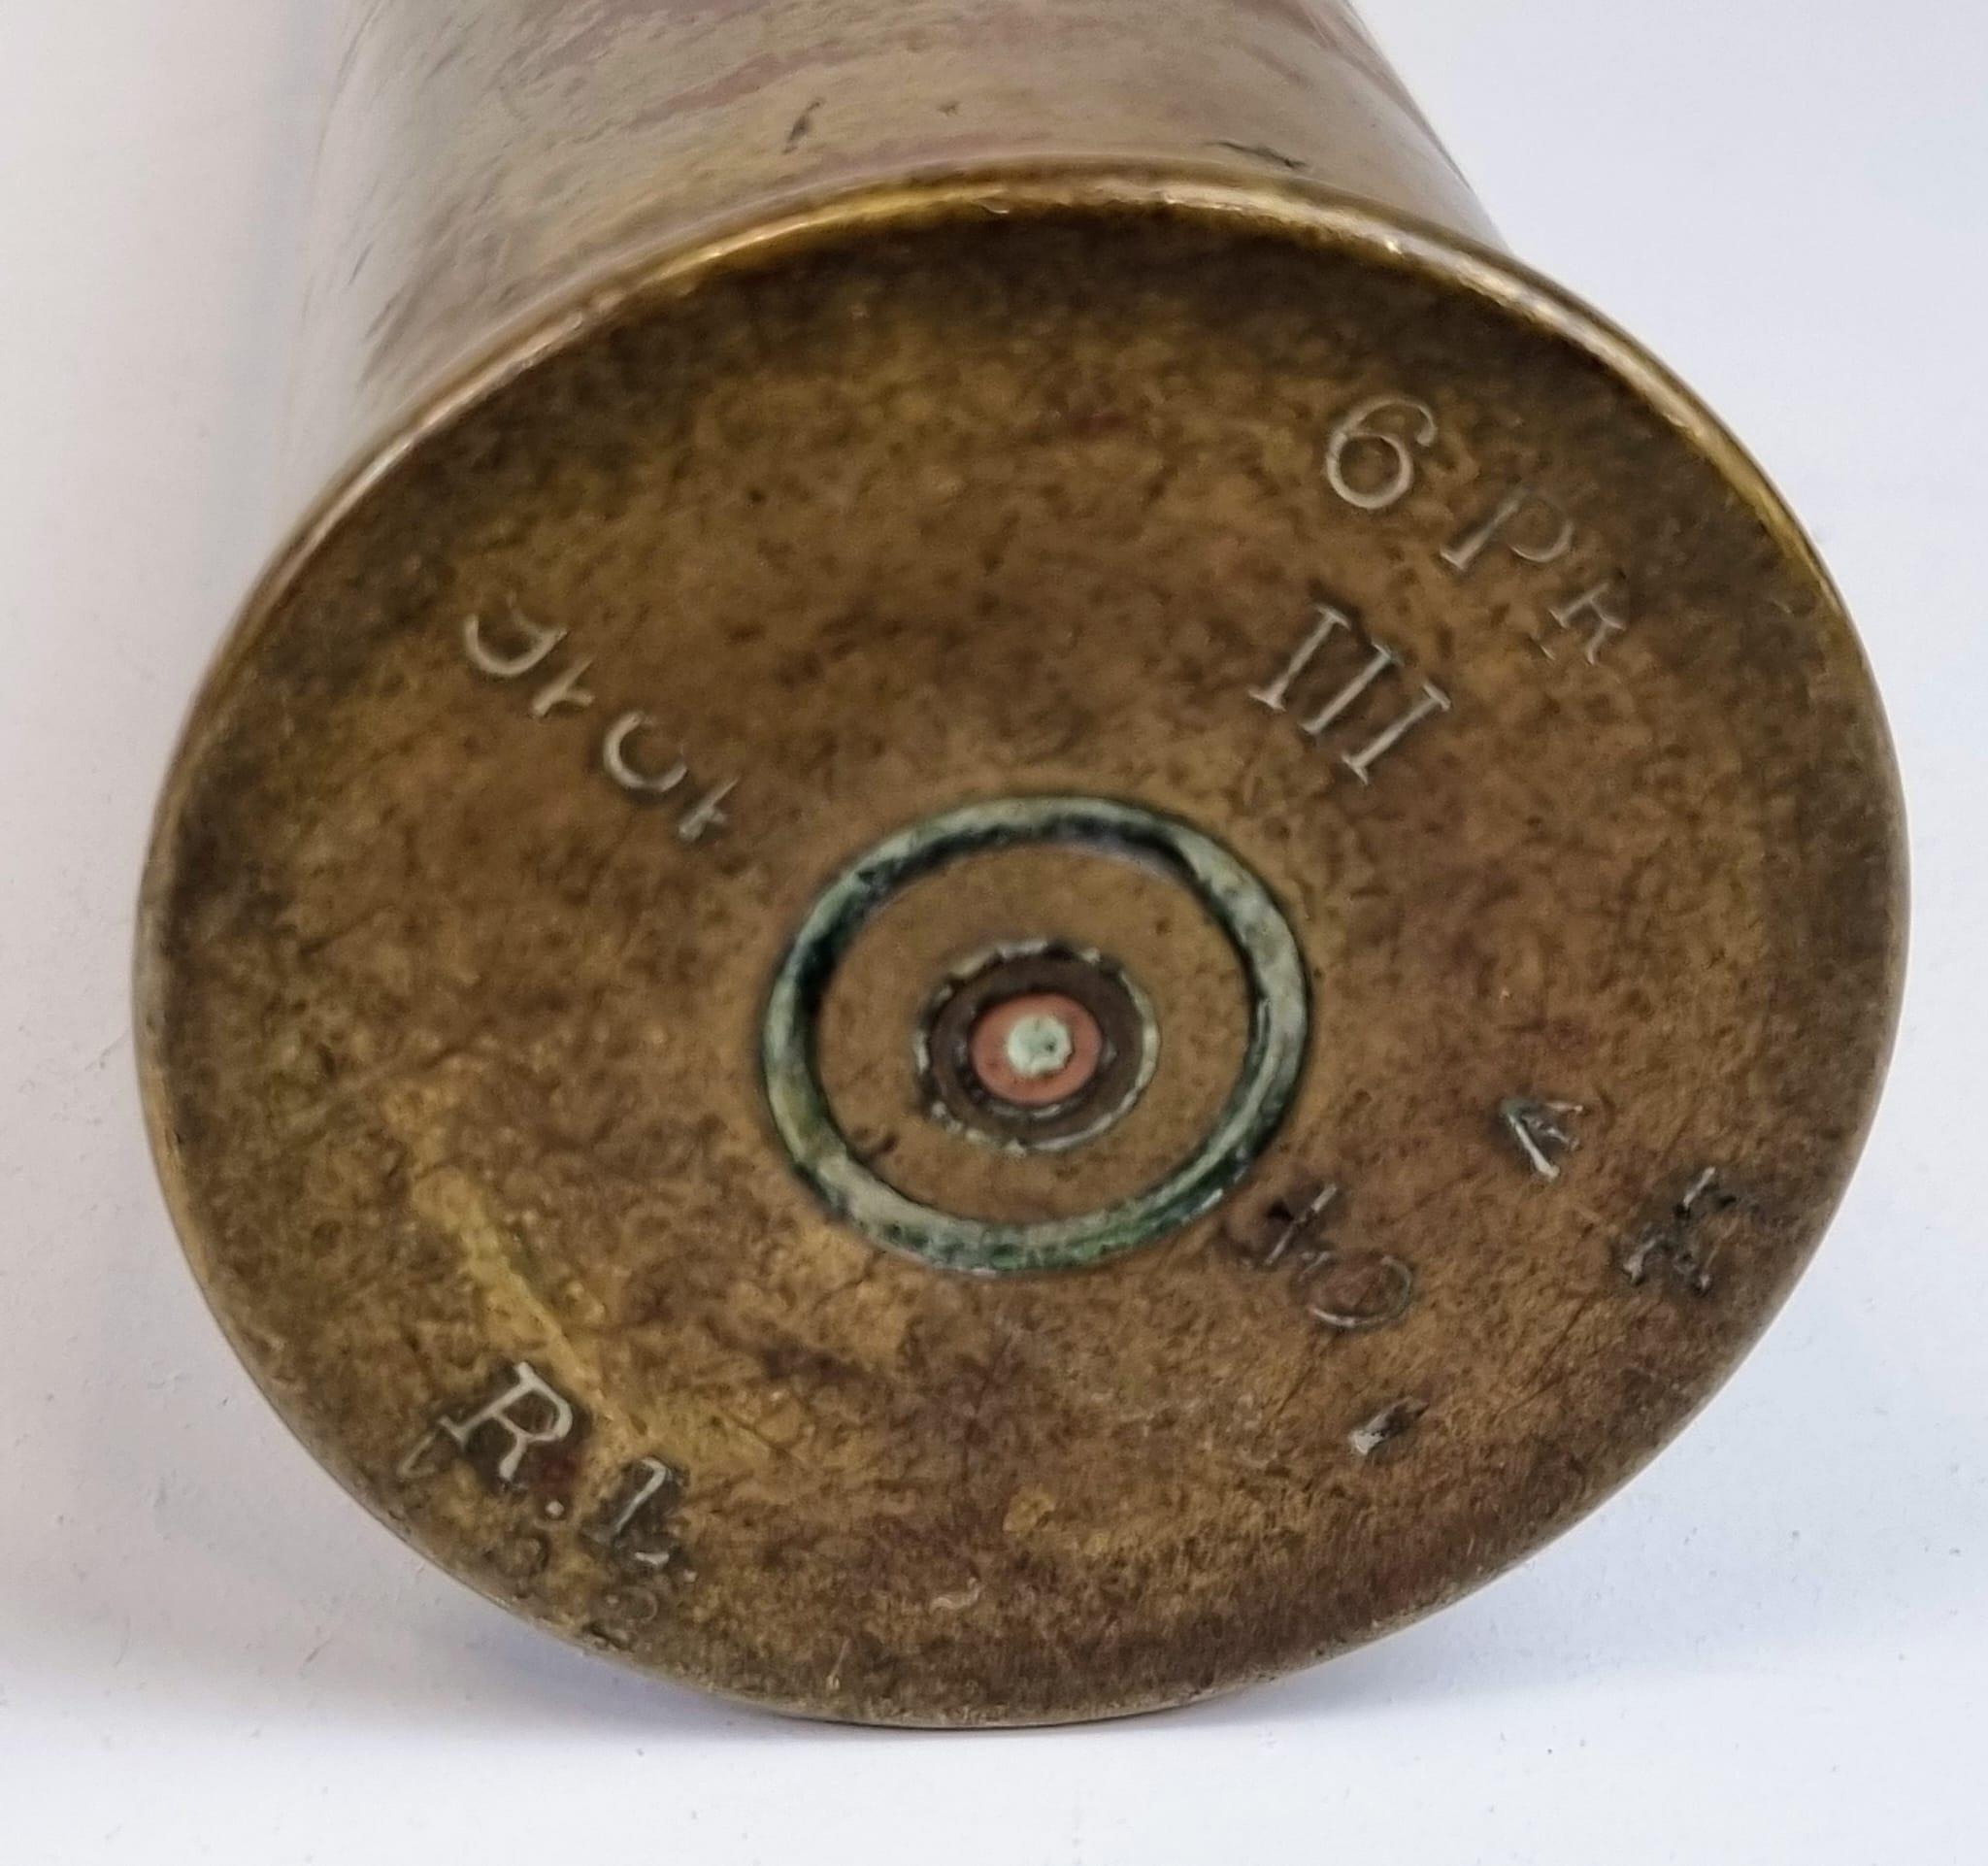 WW1 British MK1 Tank 6 Pounder Shell Case Dated 1916 (Battle of the Somme). - Image 4 of 5